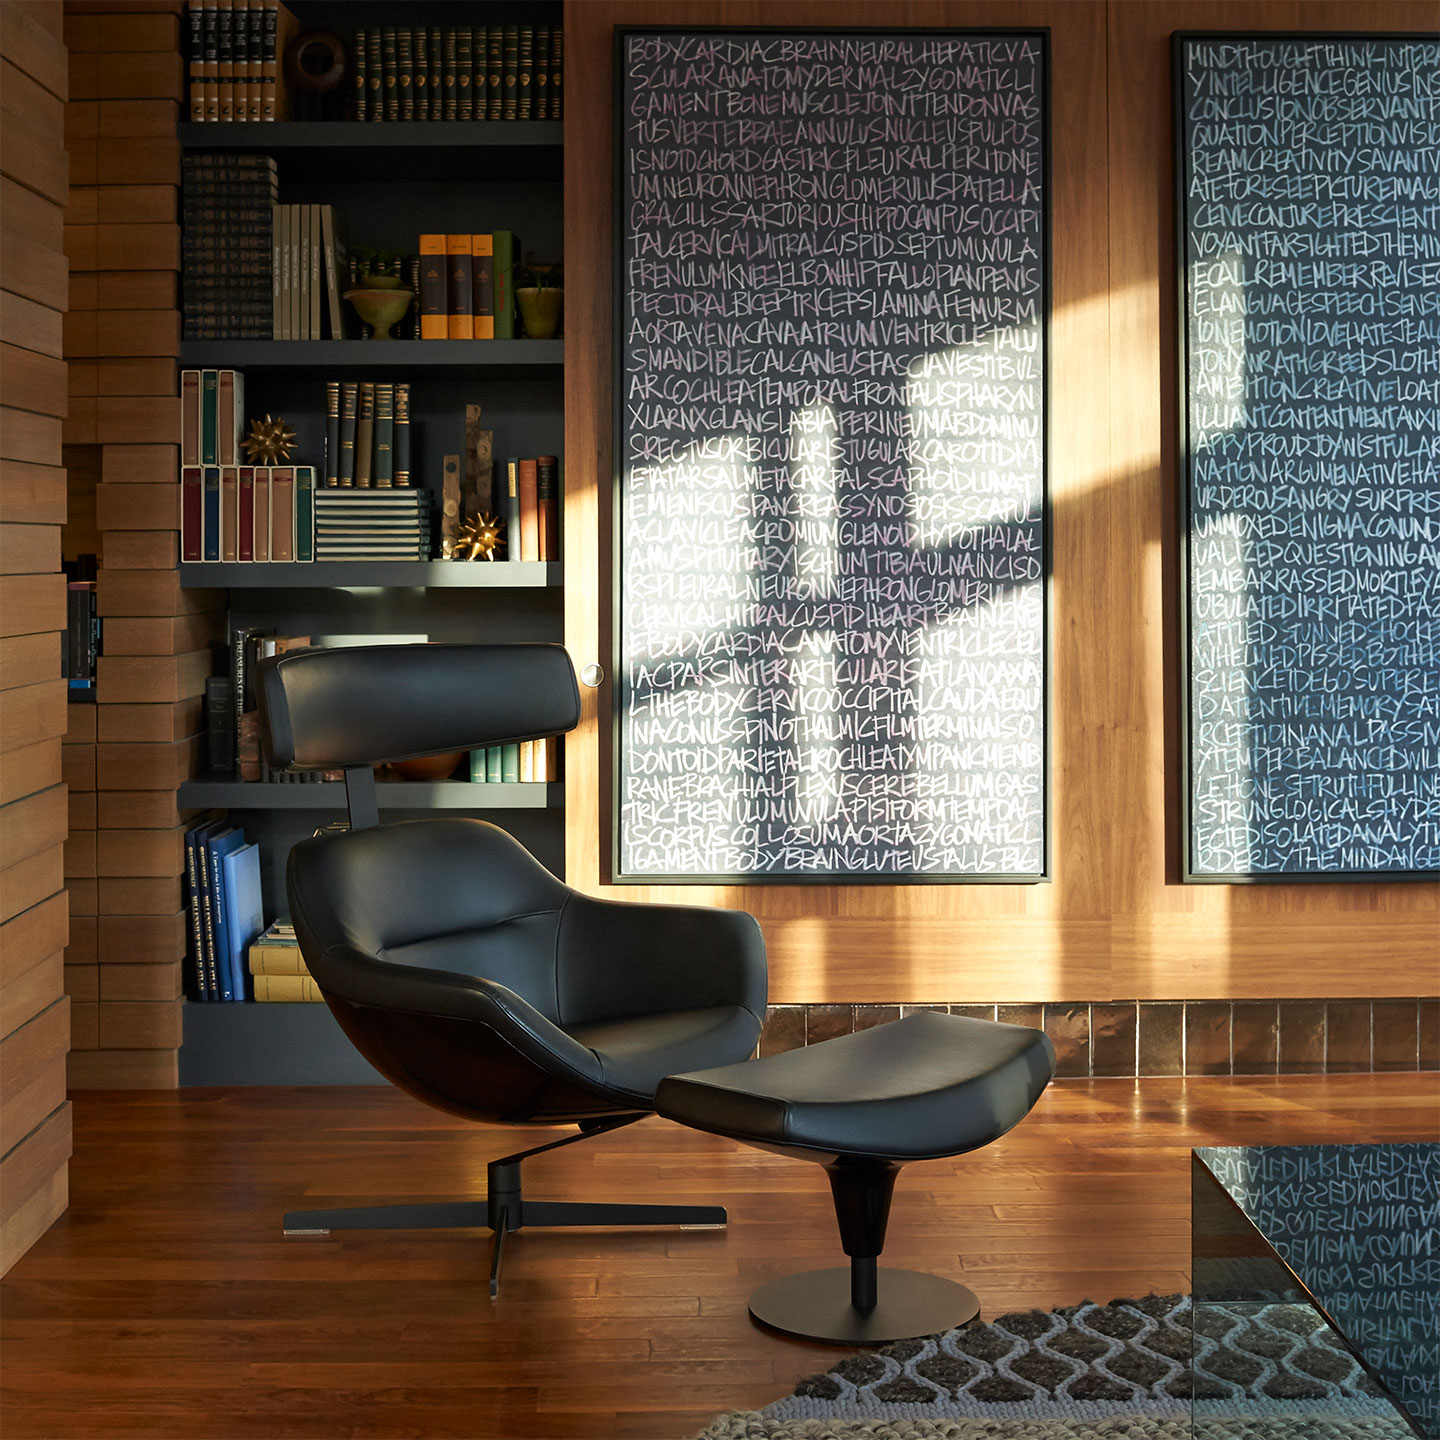 Haworth Auckland chair with ottoman in black leather in a library